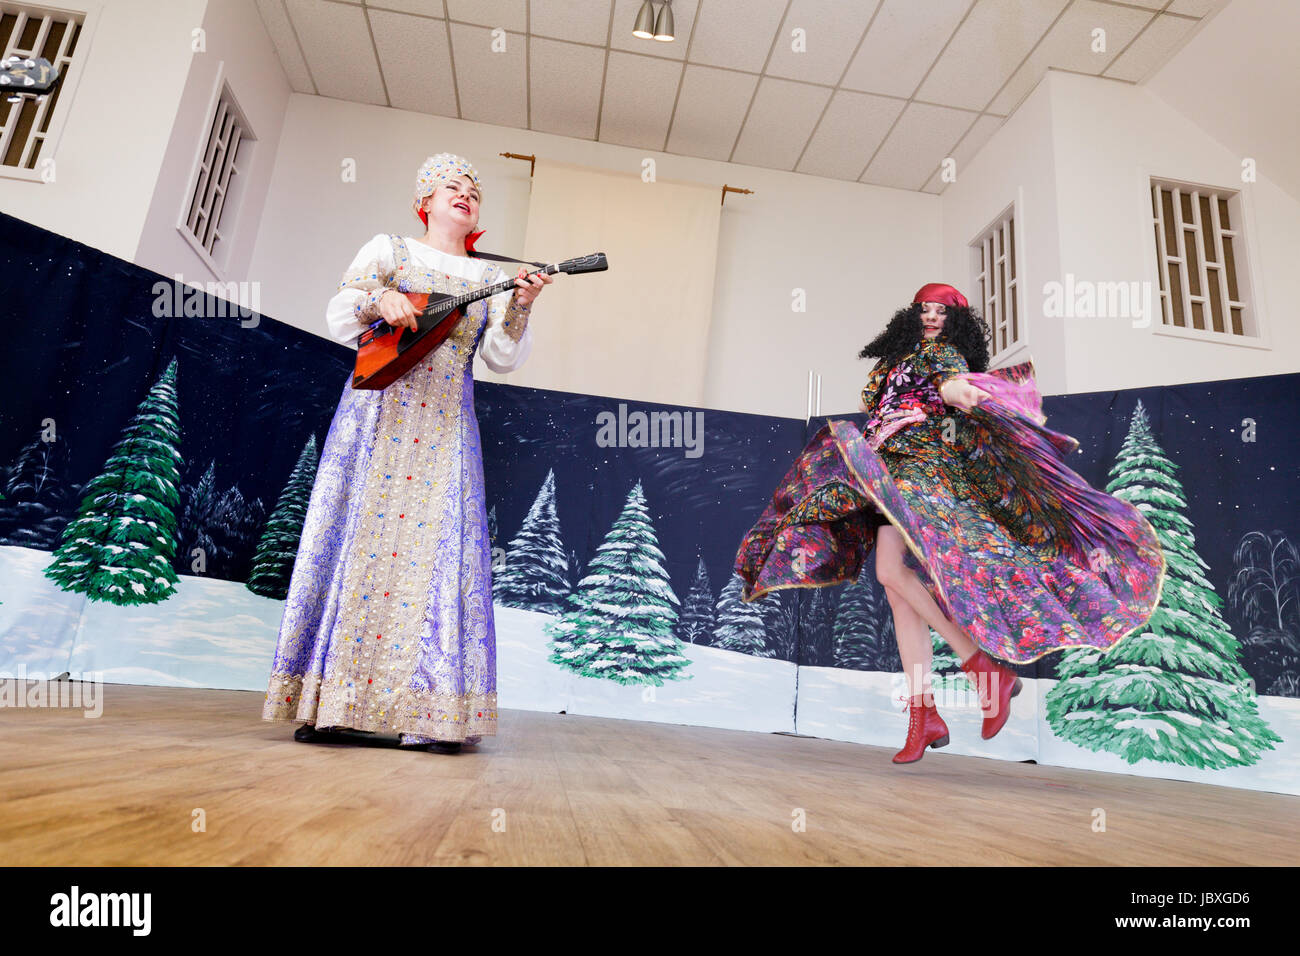 TROY, NEW YORK/USA - FEB 25 2017: Traditional music and dance at annual Russian Festival Stock Photo